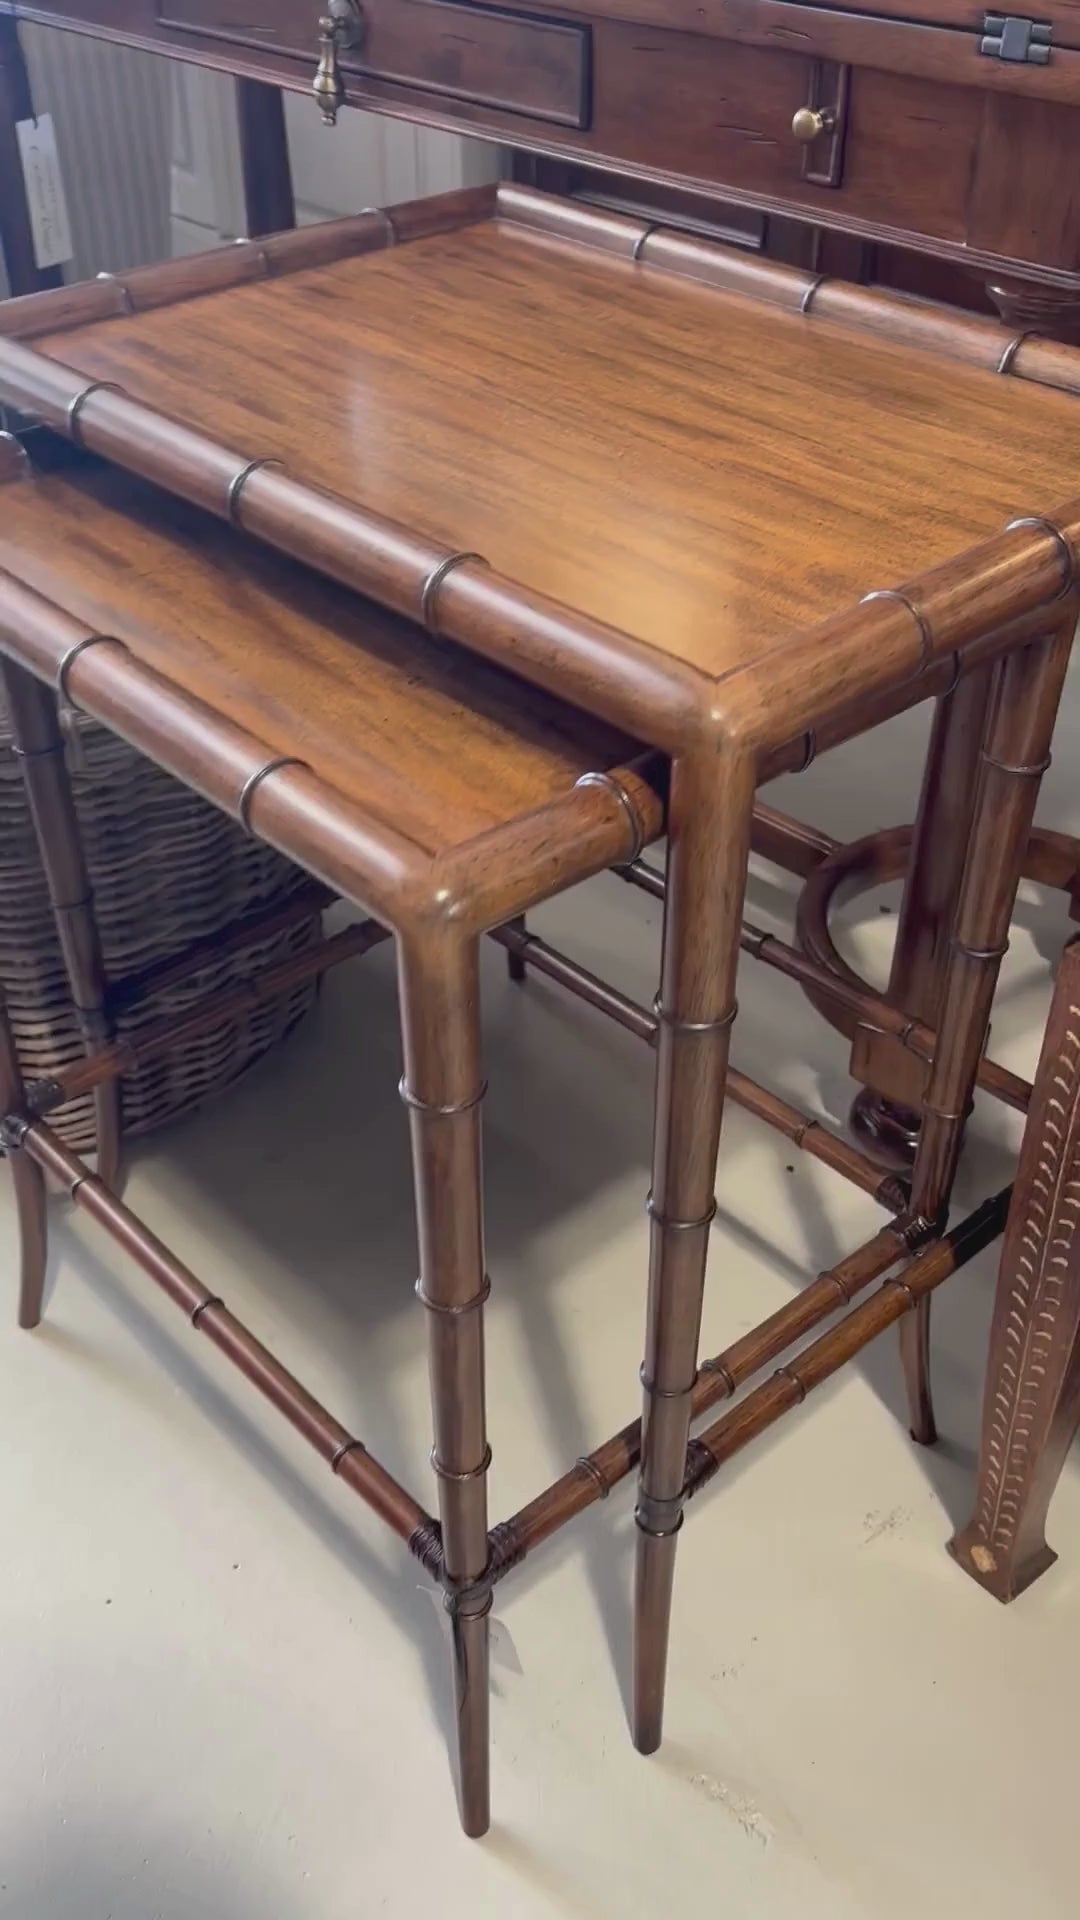 Video showing close up detail of the side and top of nesting tables